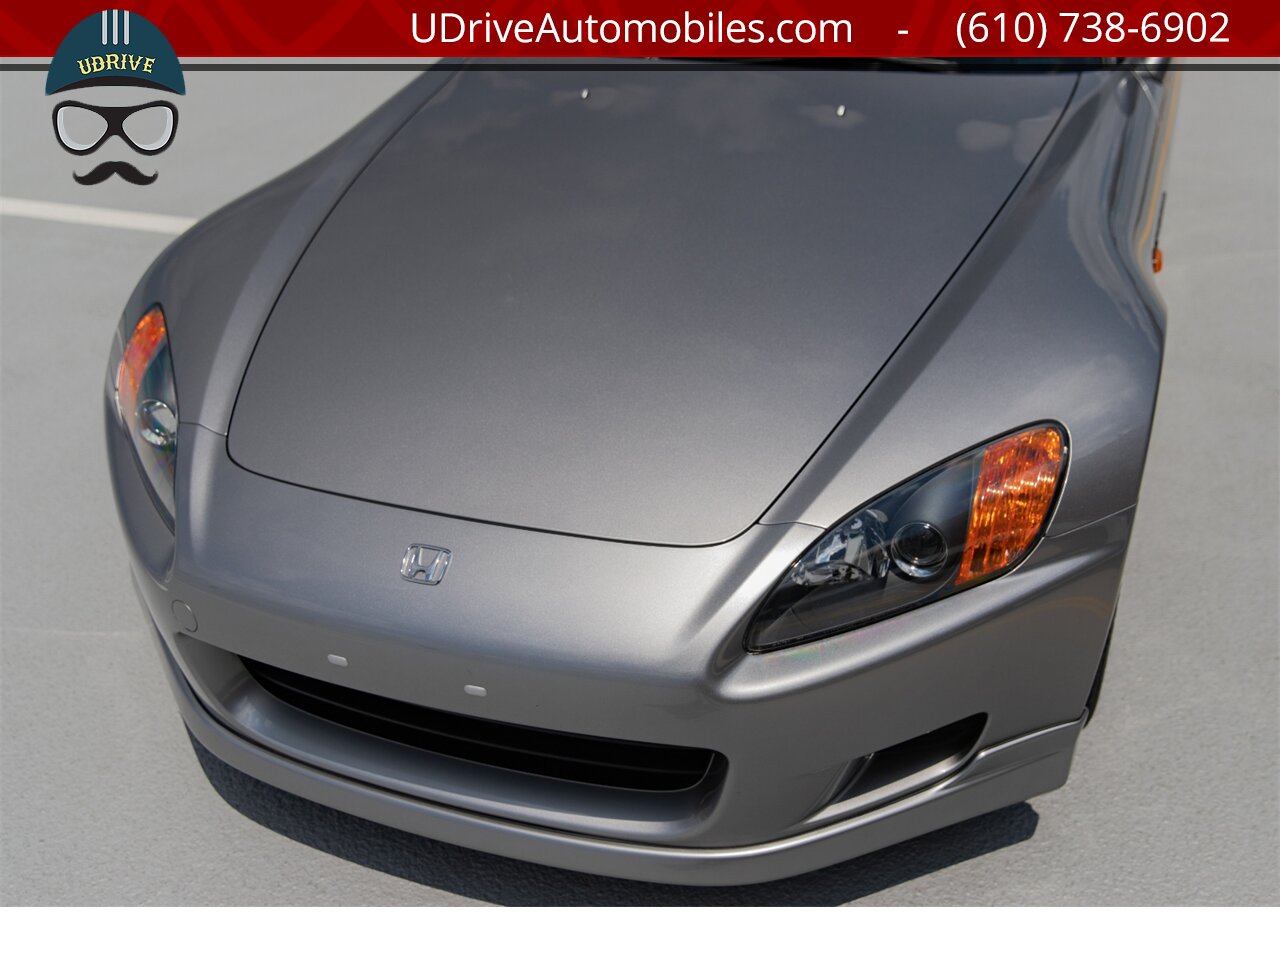 2001 Honda S2000 9k Miles Same Owner Since 2001 Service History   - Photo 8 - West Chester, PA 19382